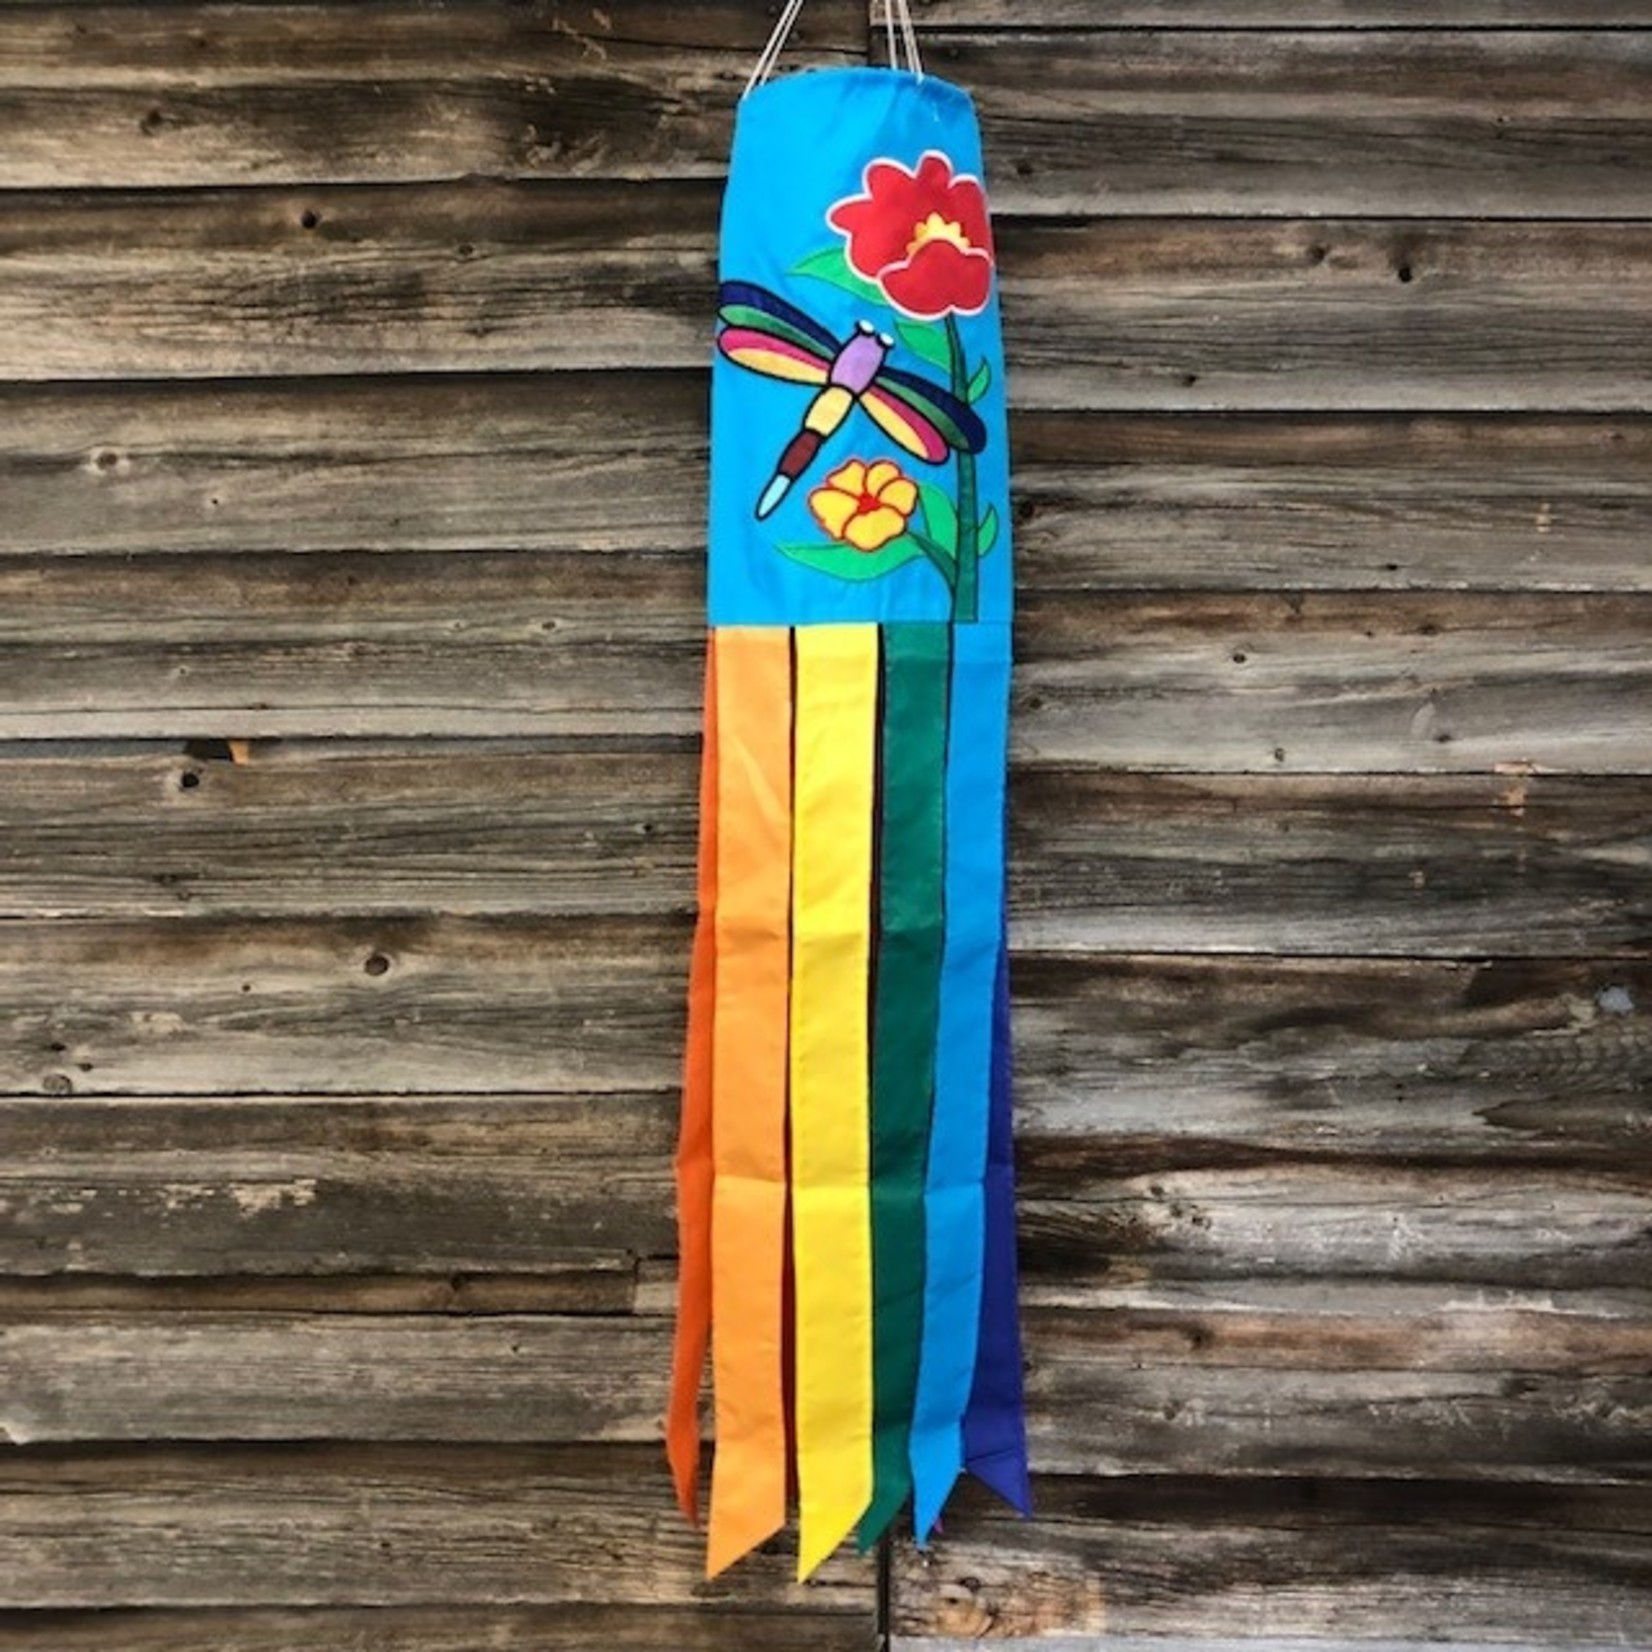 Windsock - Dragonfly 40"